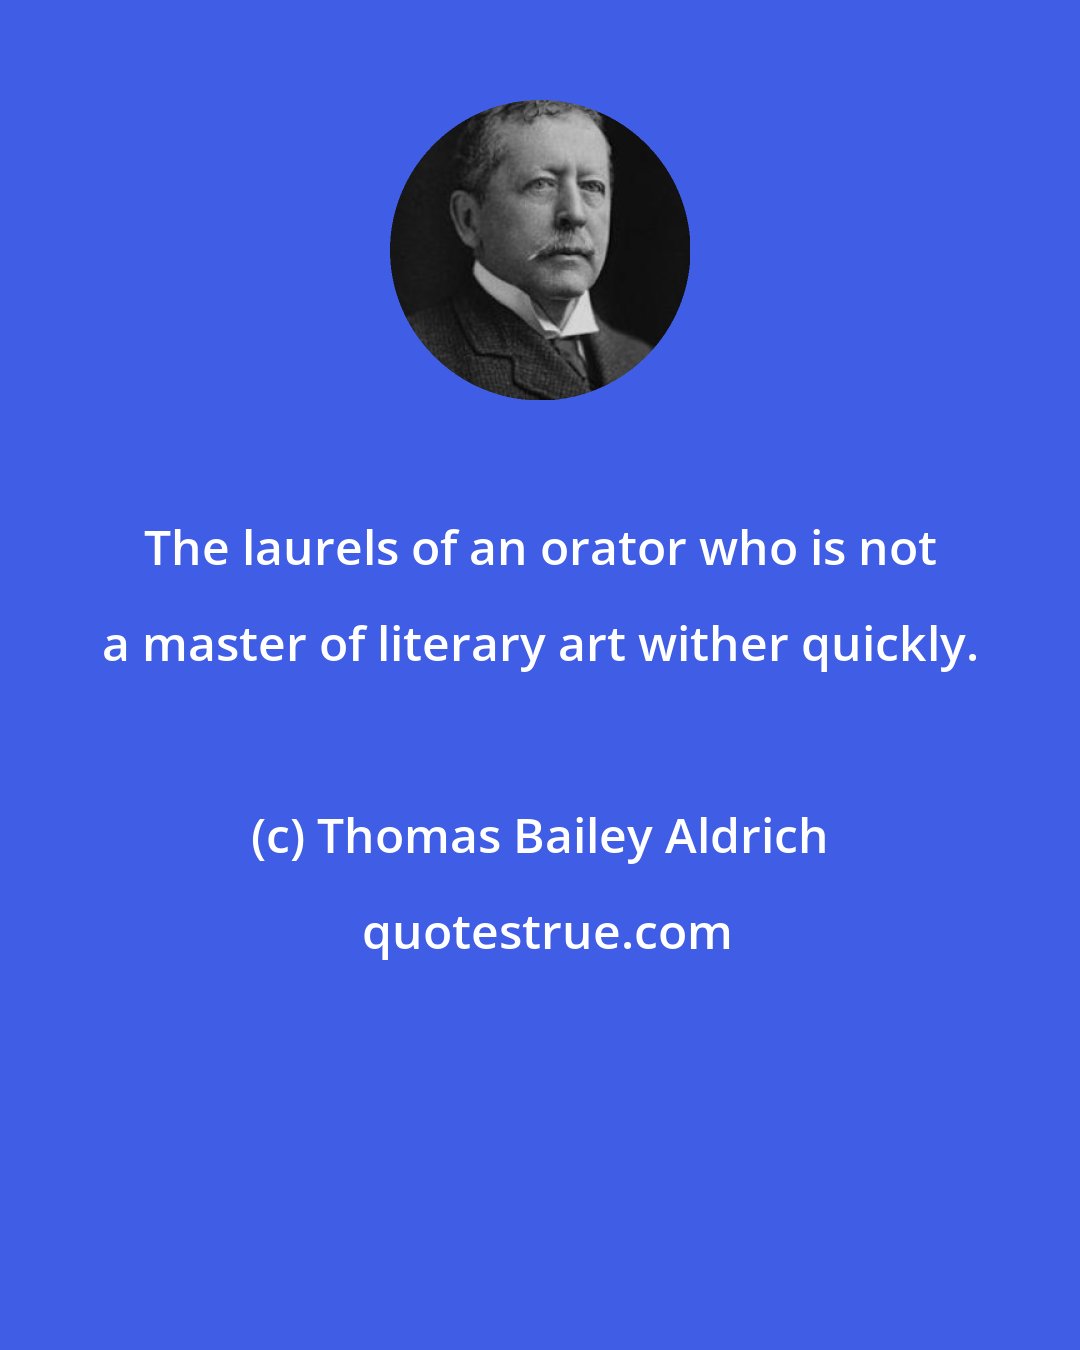 Thomas Bailey Aldrich: The laurels of an orator who is not a master of literary art wither quickly.